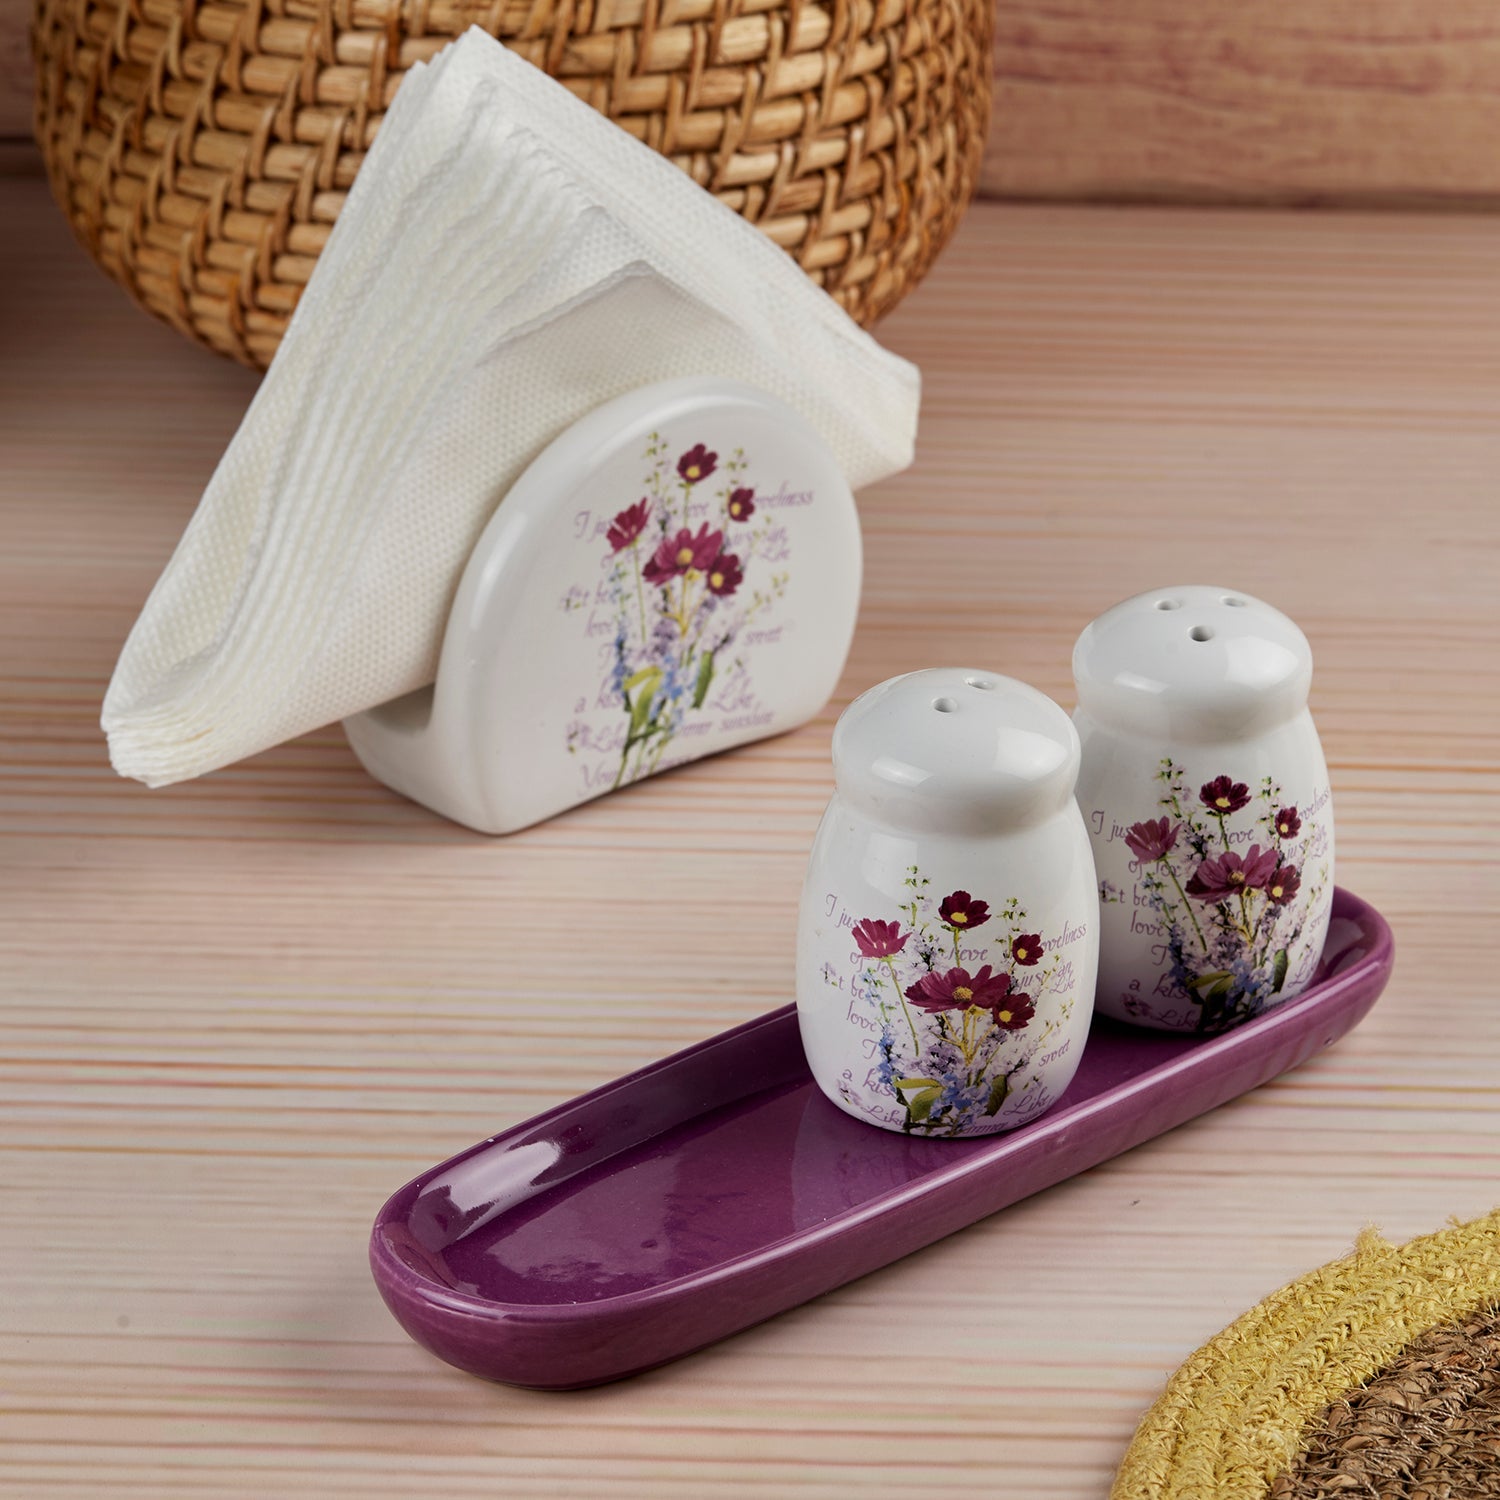 Ceramic Salt and Pepper Shakers Set with tray for Dining Table (10715)